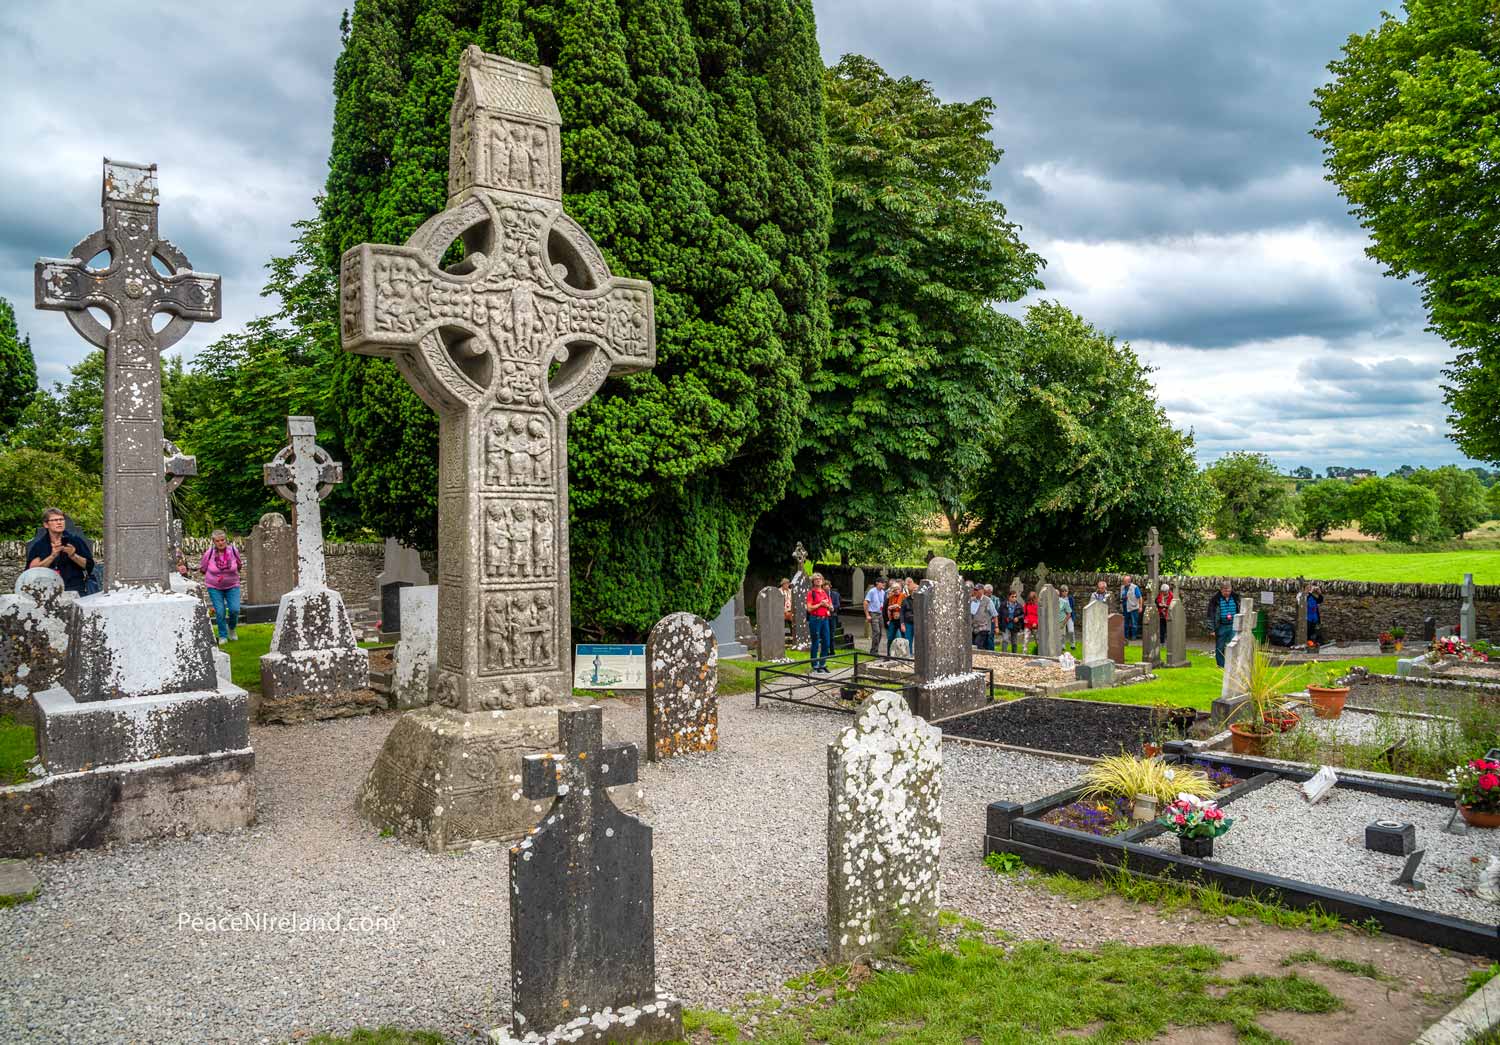 Also at Monasterboice, standing 5.2 metres high, the cross of Muiredach. This 'west face' depicts scenes from the New Testament and there are also scriptural panels on the sides.